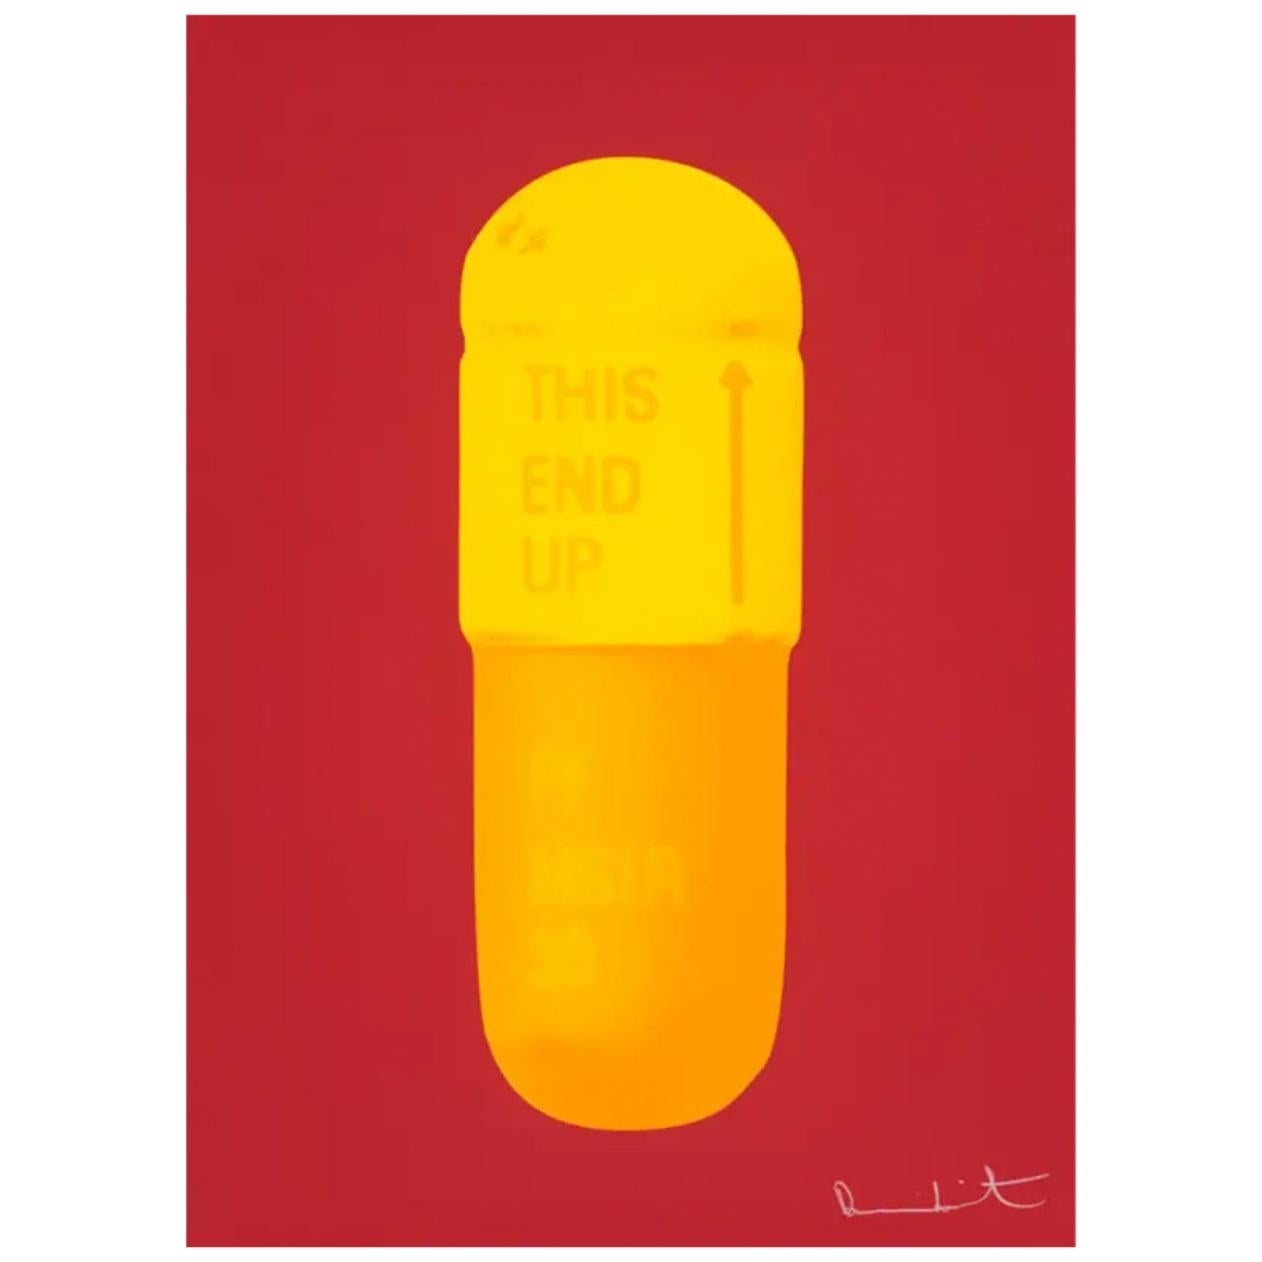 Damien Hirst, The Cure, Fire Red Sun/Yellow/Fire/Orange For Sale